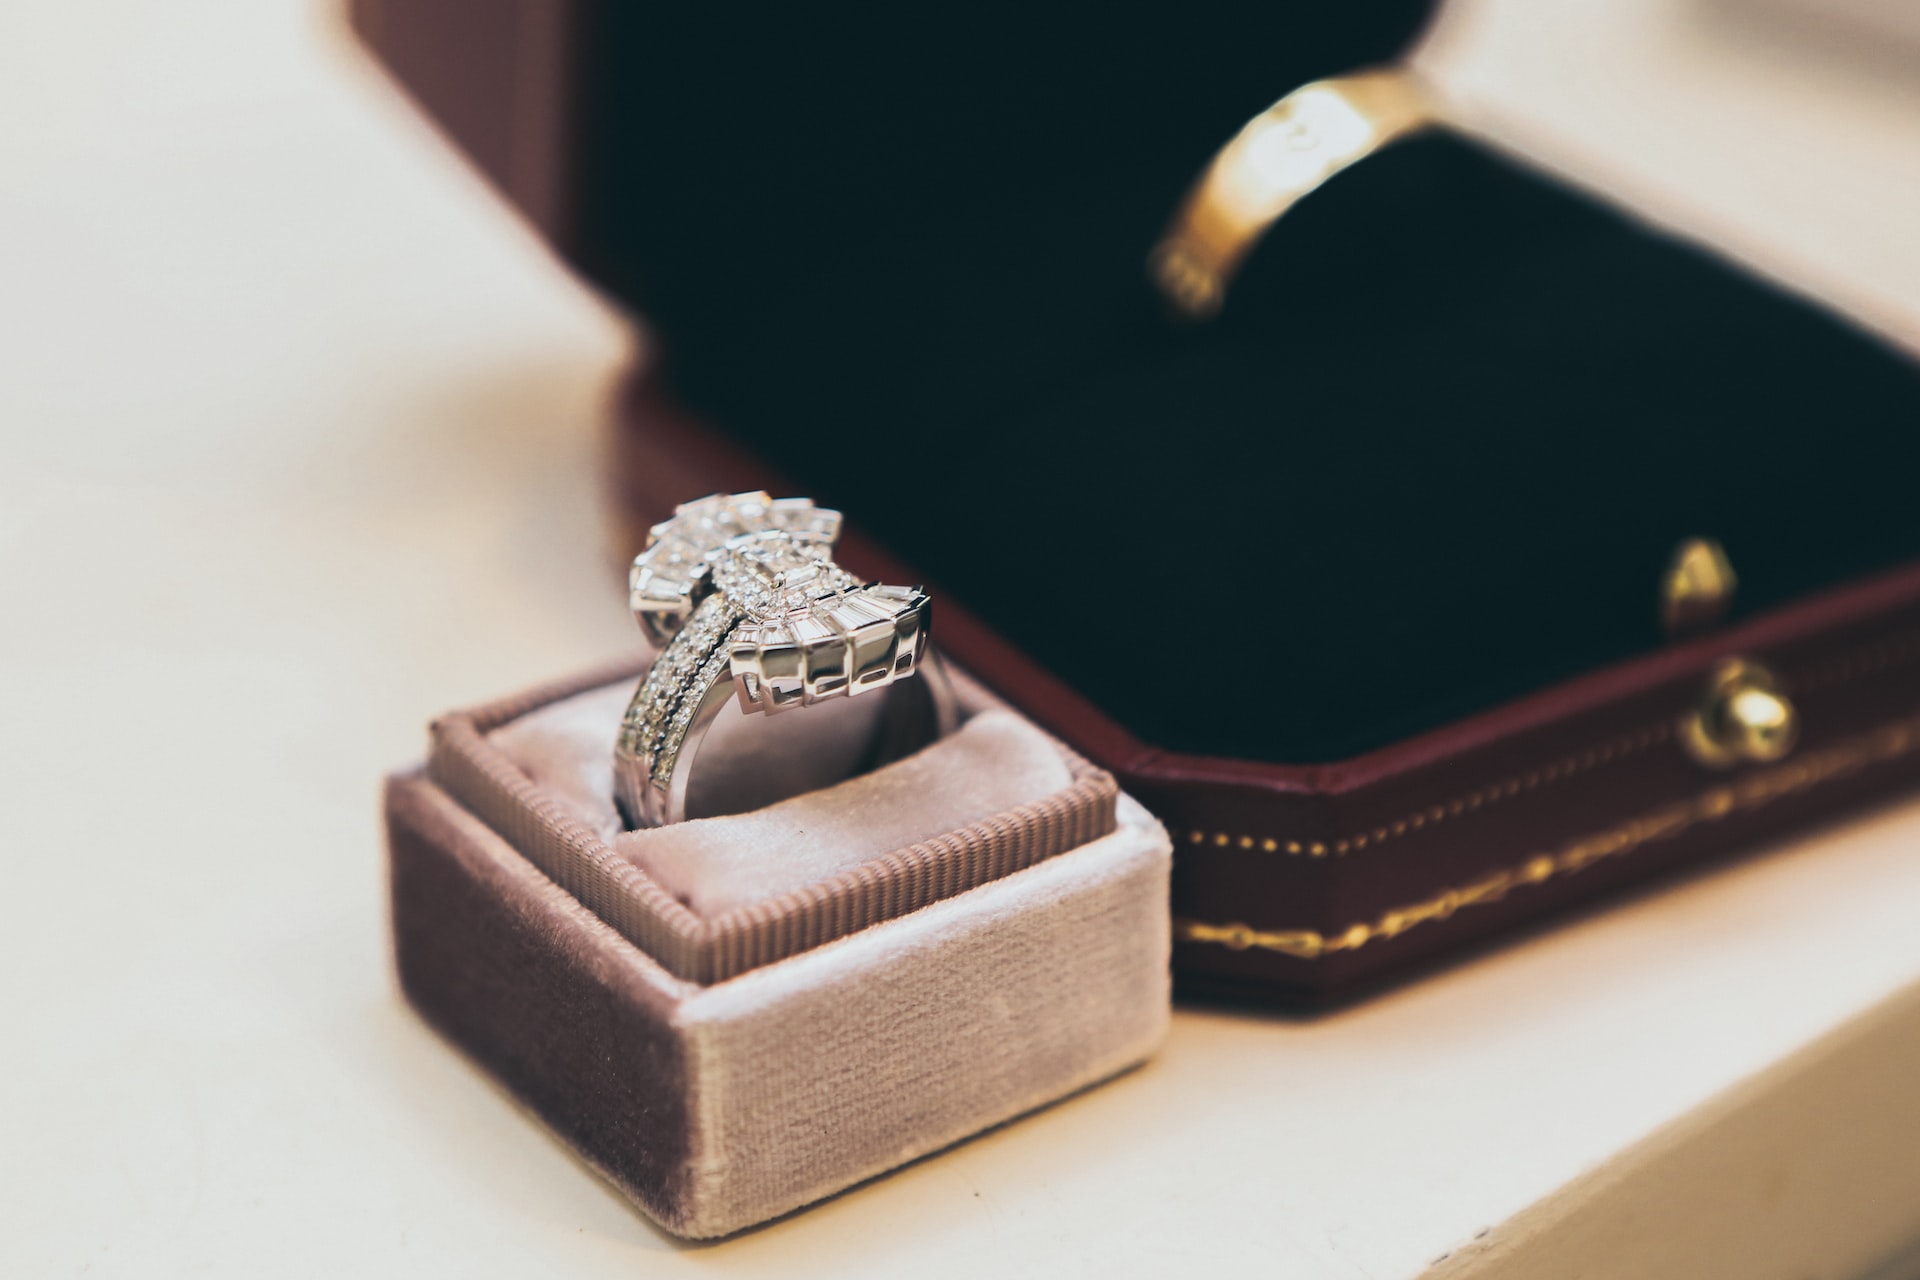 5 Great Ways to Make Her Wedding Ring Unique